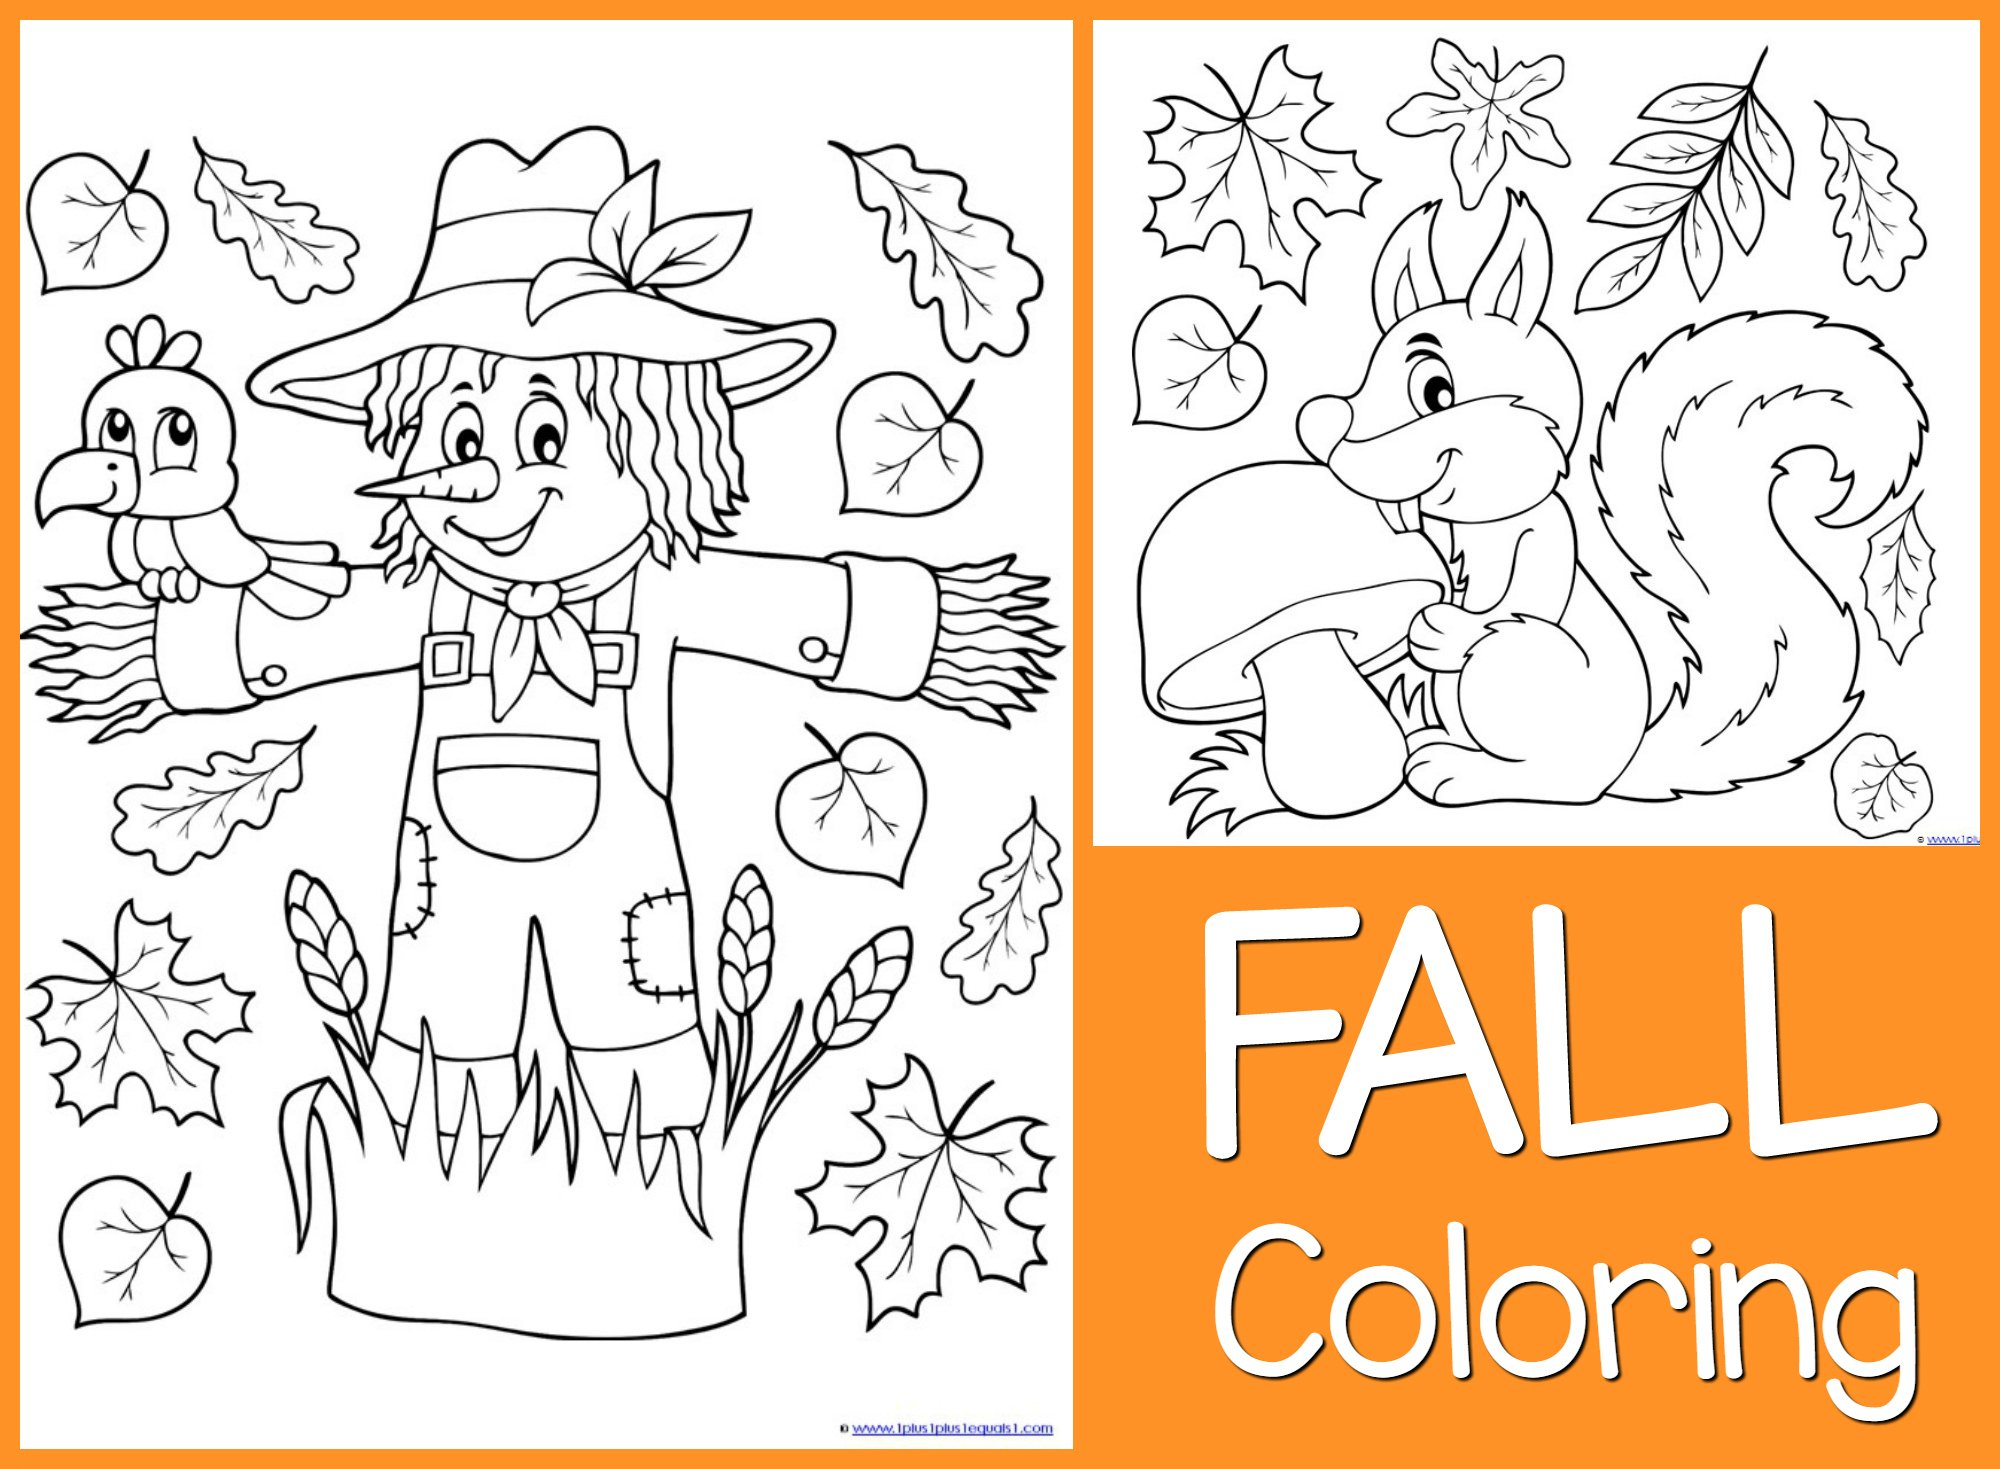 Just Color  Free Coloring Printables Or Free Coloring Worksheets